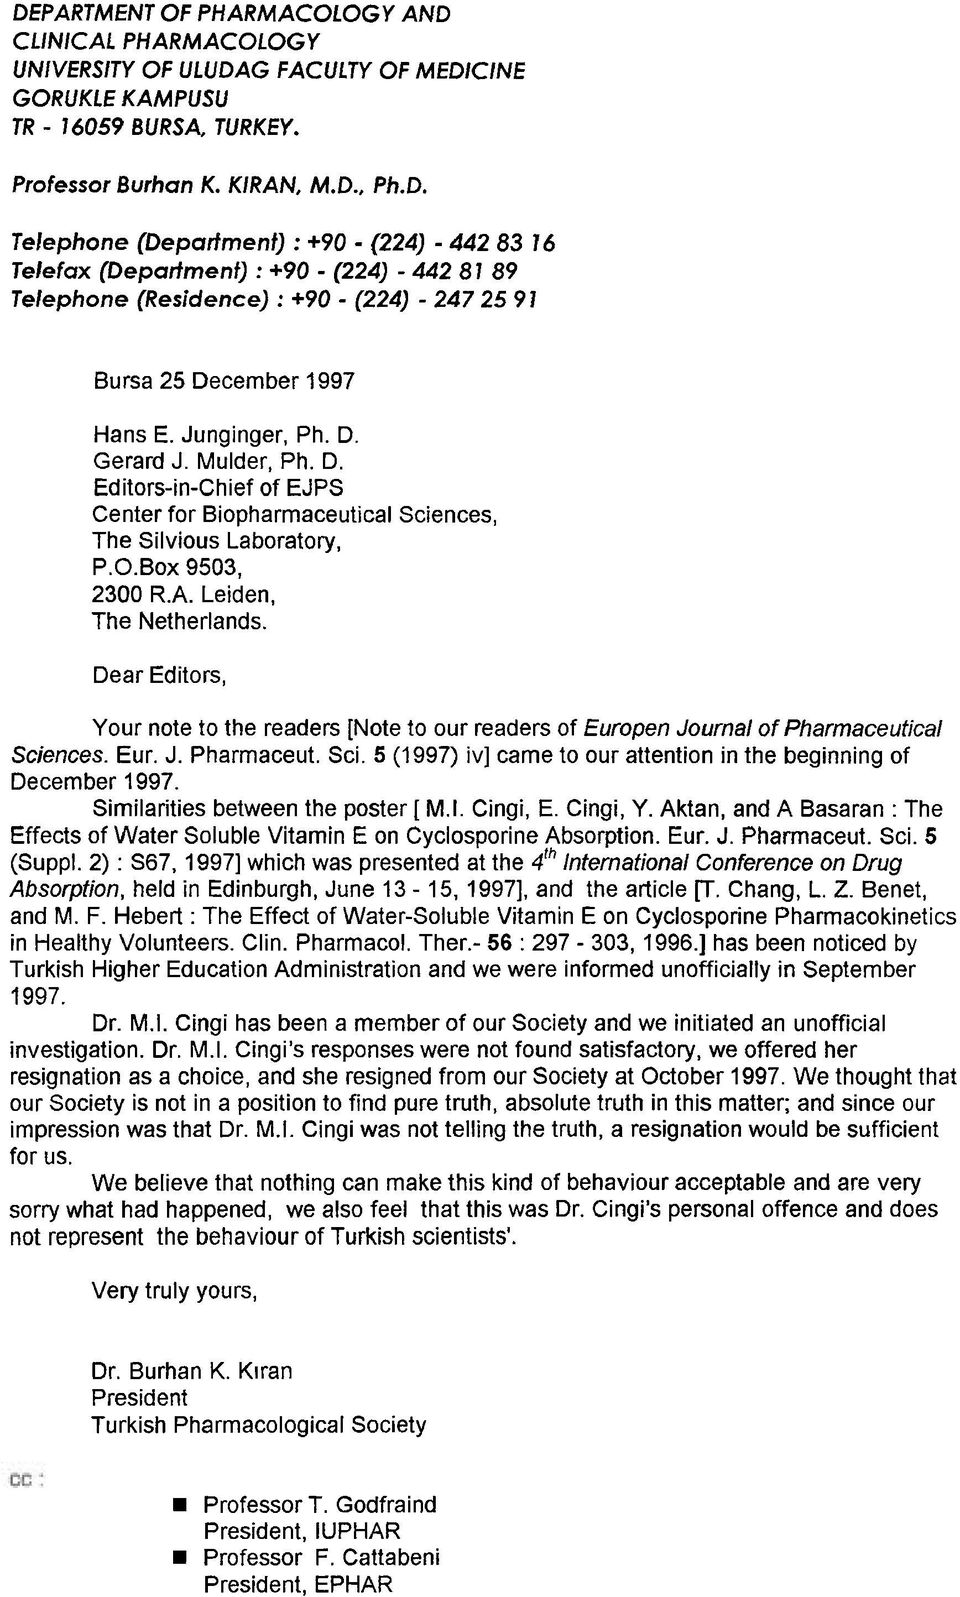 Dear Editors, Your note to the readers [Note to our readers of Europen Journal of Pharmaceutical Sciences. Eur. J. Pharmaceut. Sci. 5 (1997) iv] came to our attention in the beginning of December 1997.